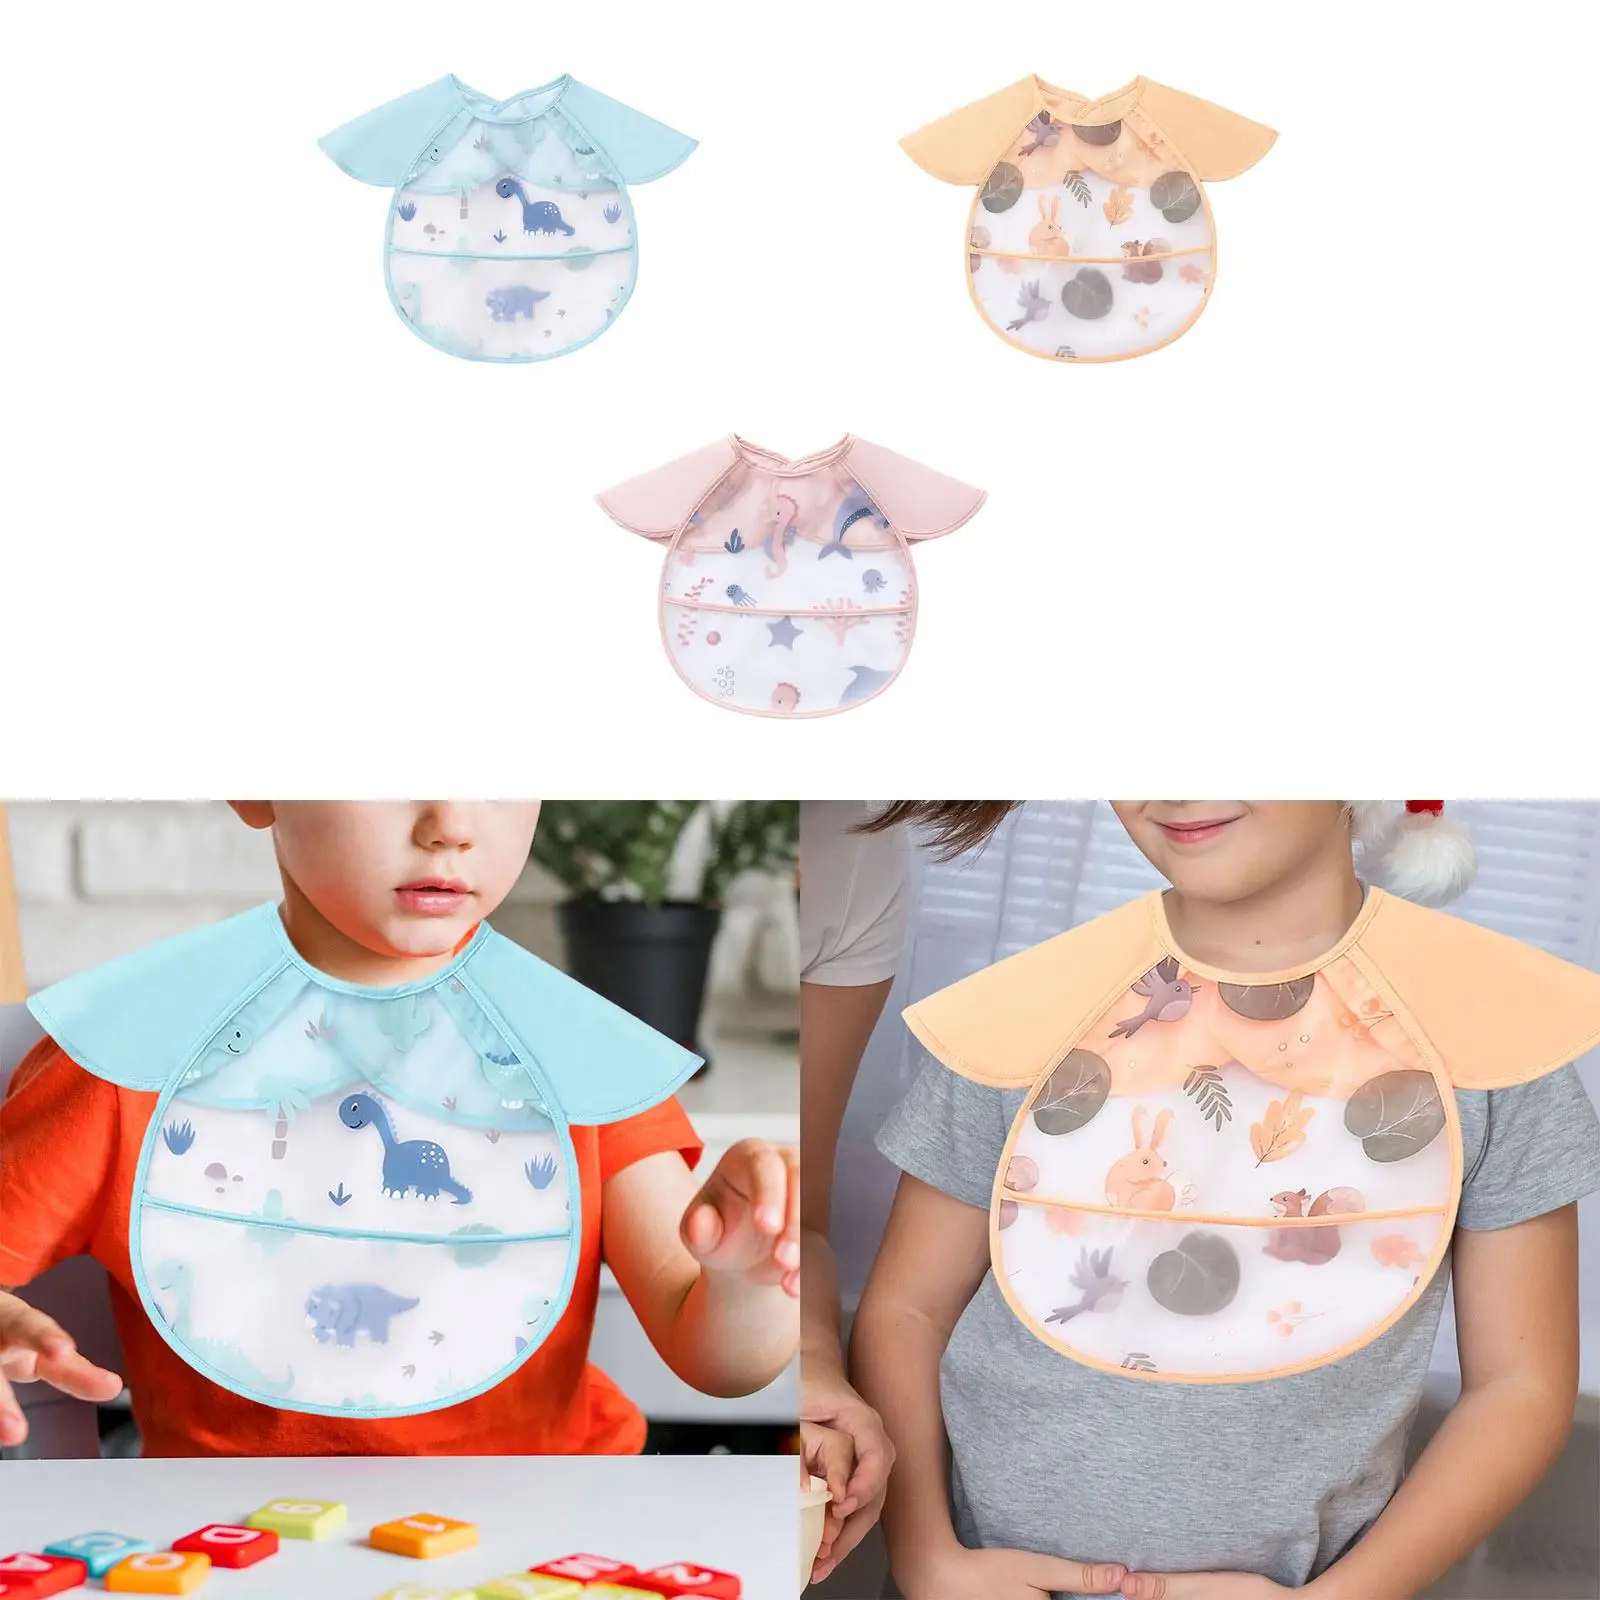 Waterproof Bib for Baby Eating Smock Easy Clean Lightweight Baby Feeding Bib for 6-36 Months for Drawing Feeding Eating Supplies